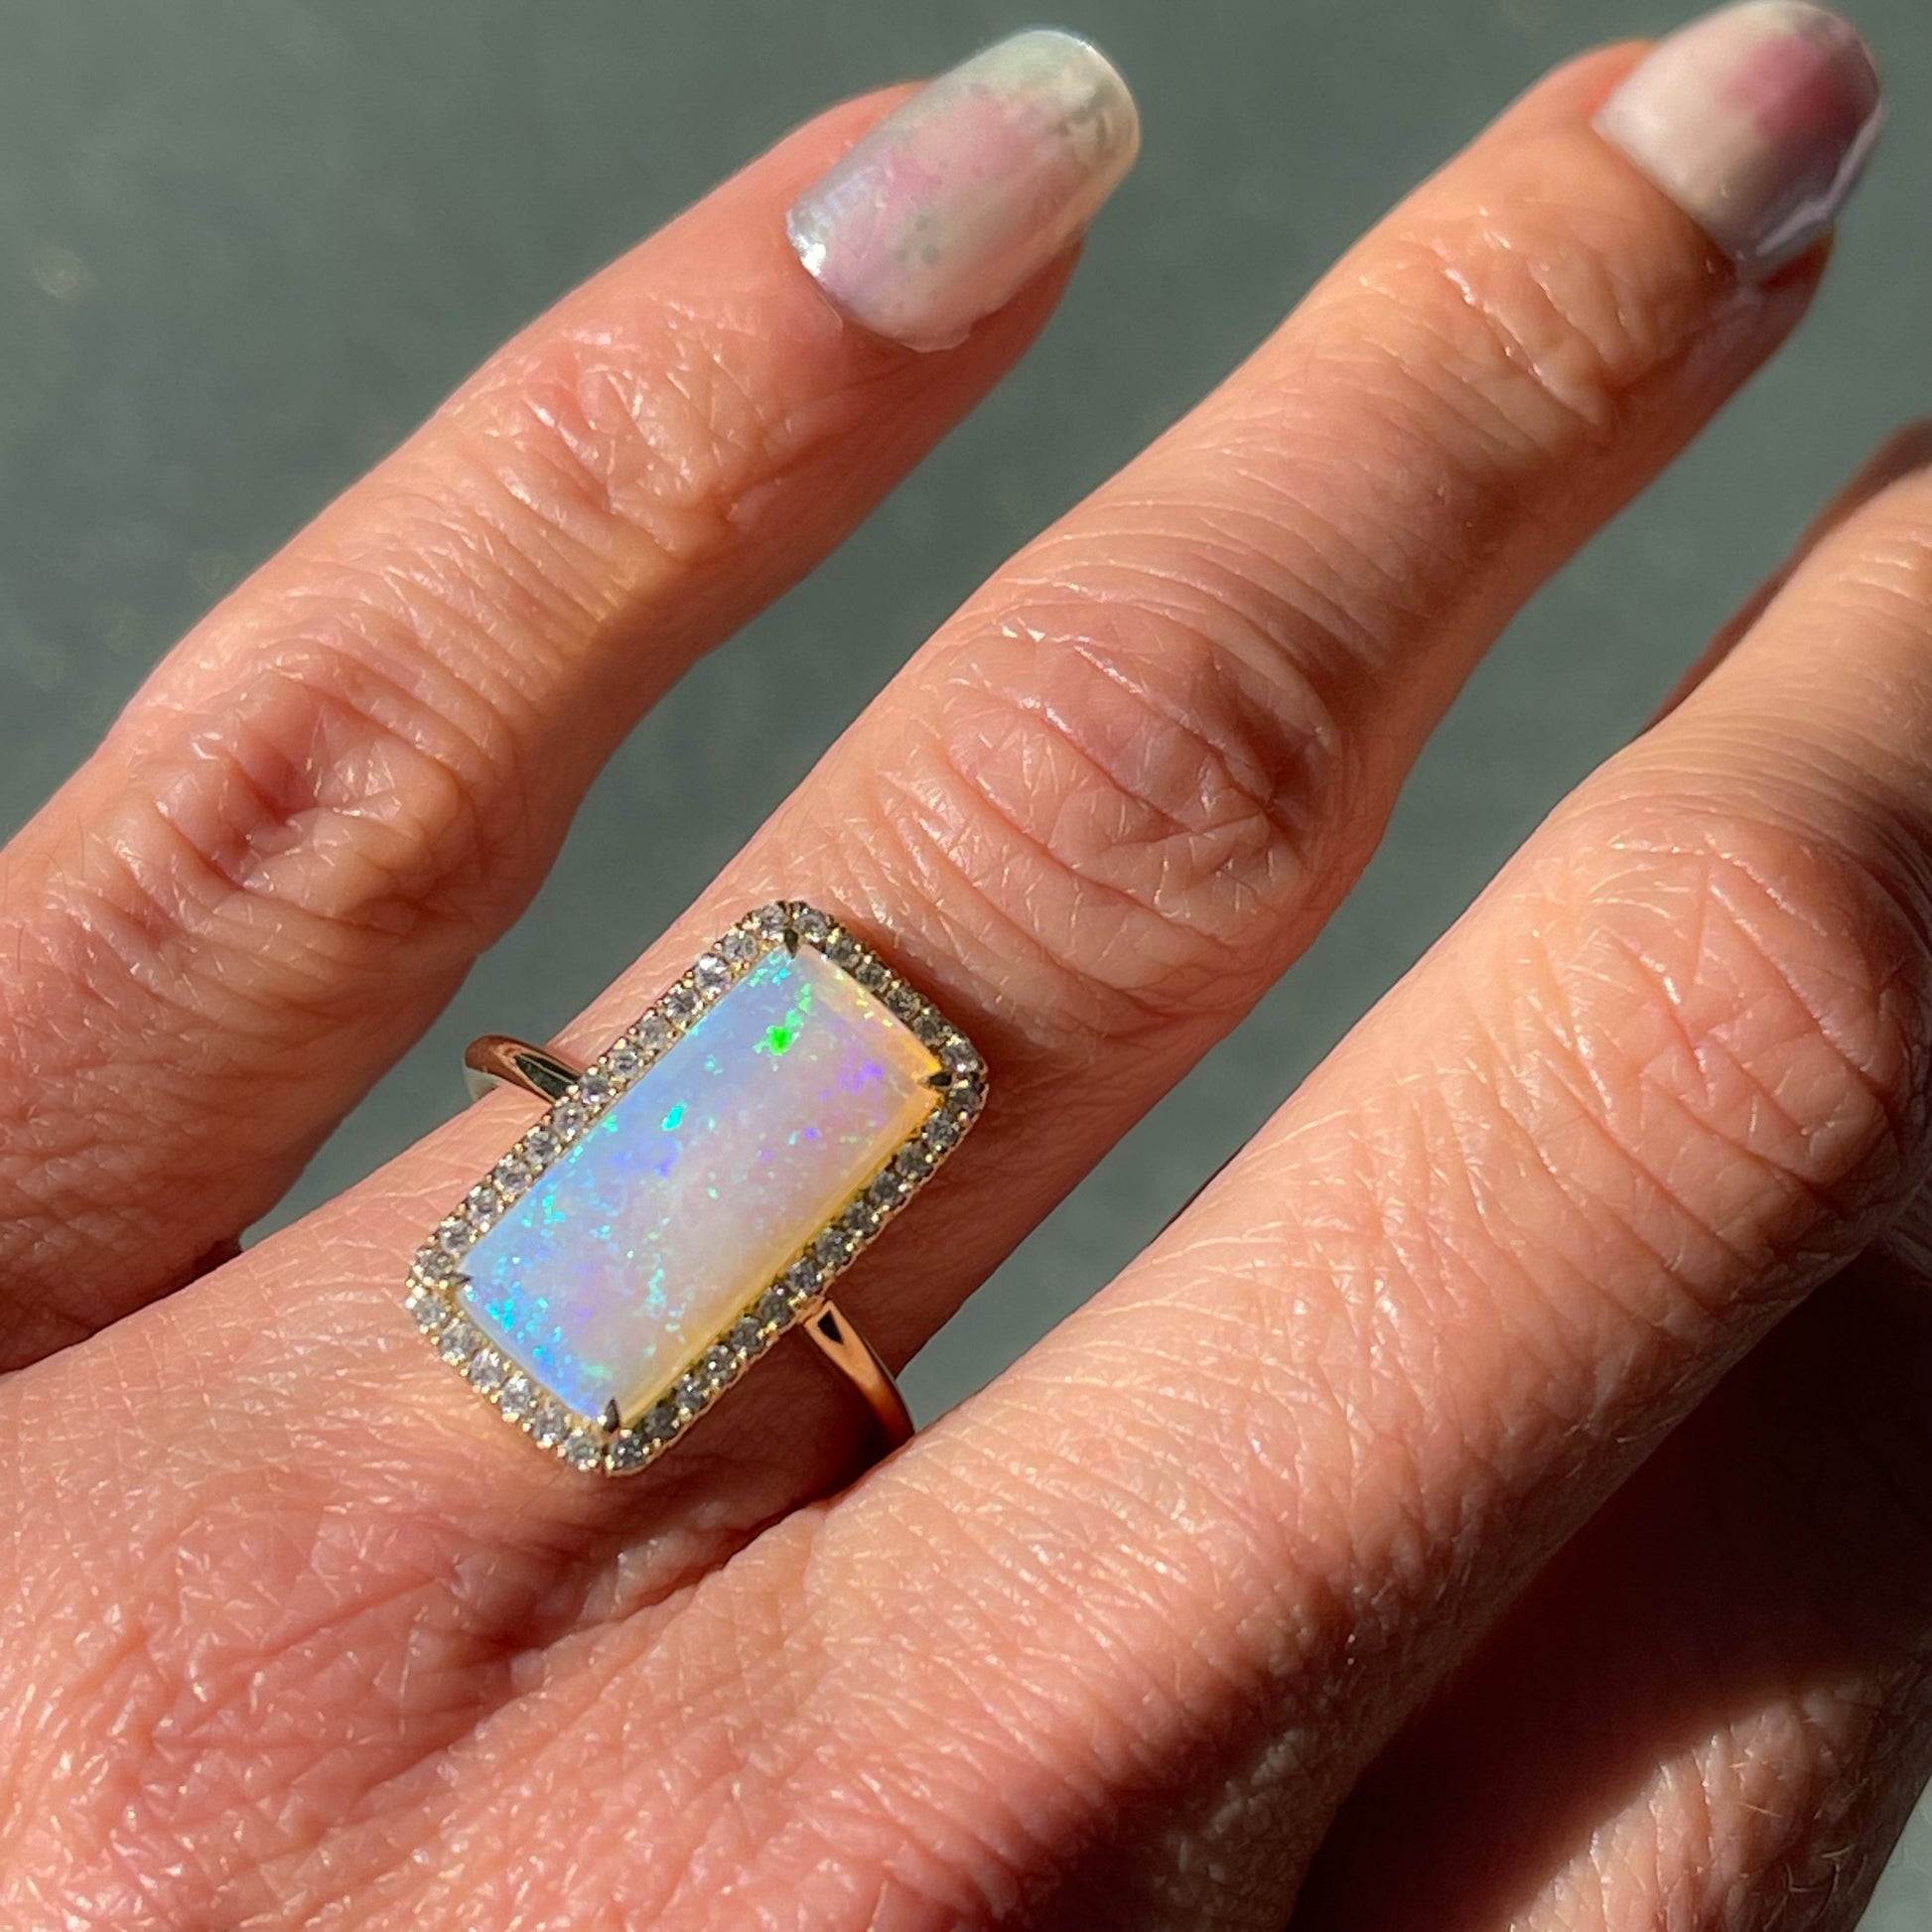 An Australian Opal Ring by NIXIN Jewelry modeled on the hand in fading light. An opal and diamond ring.